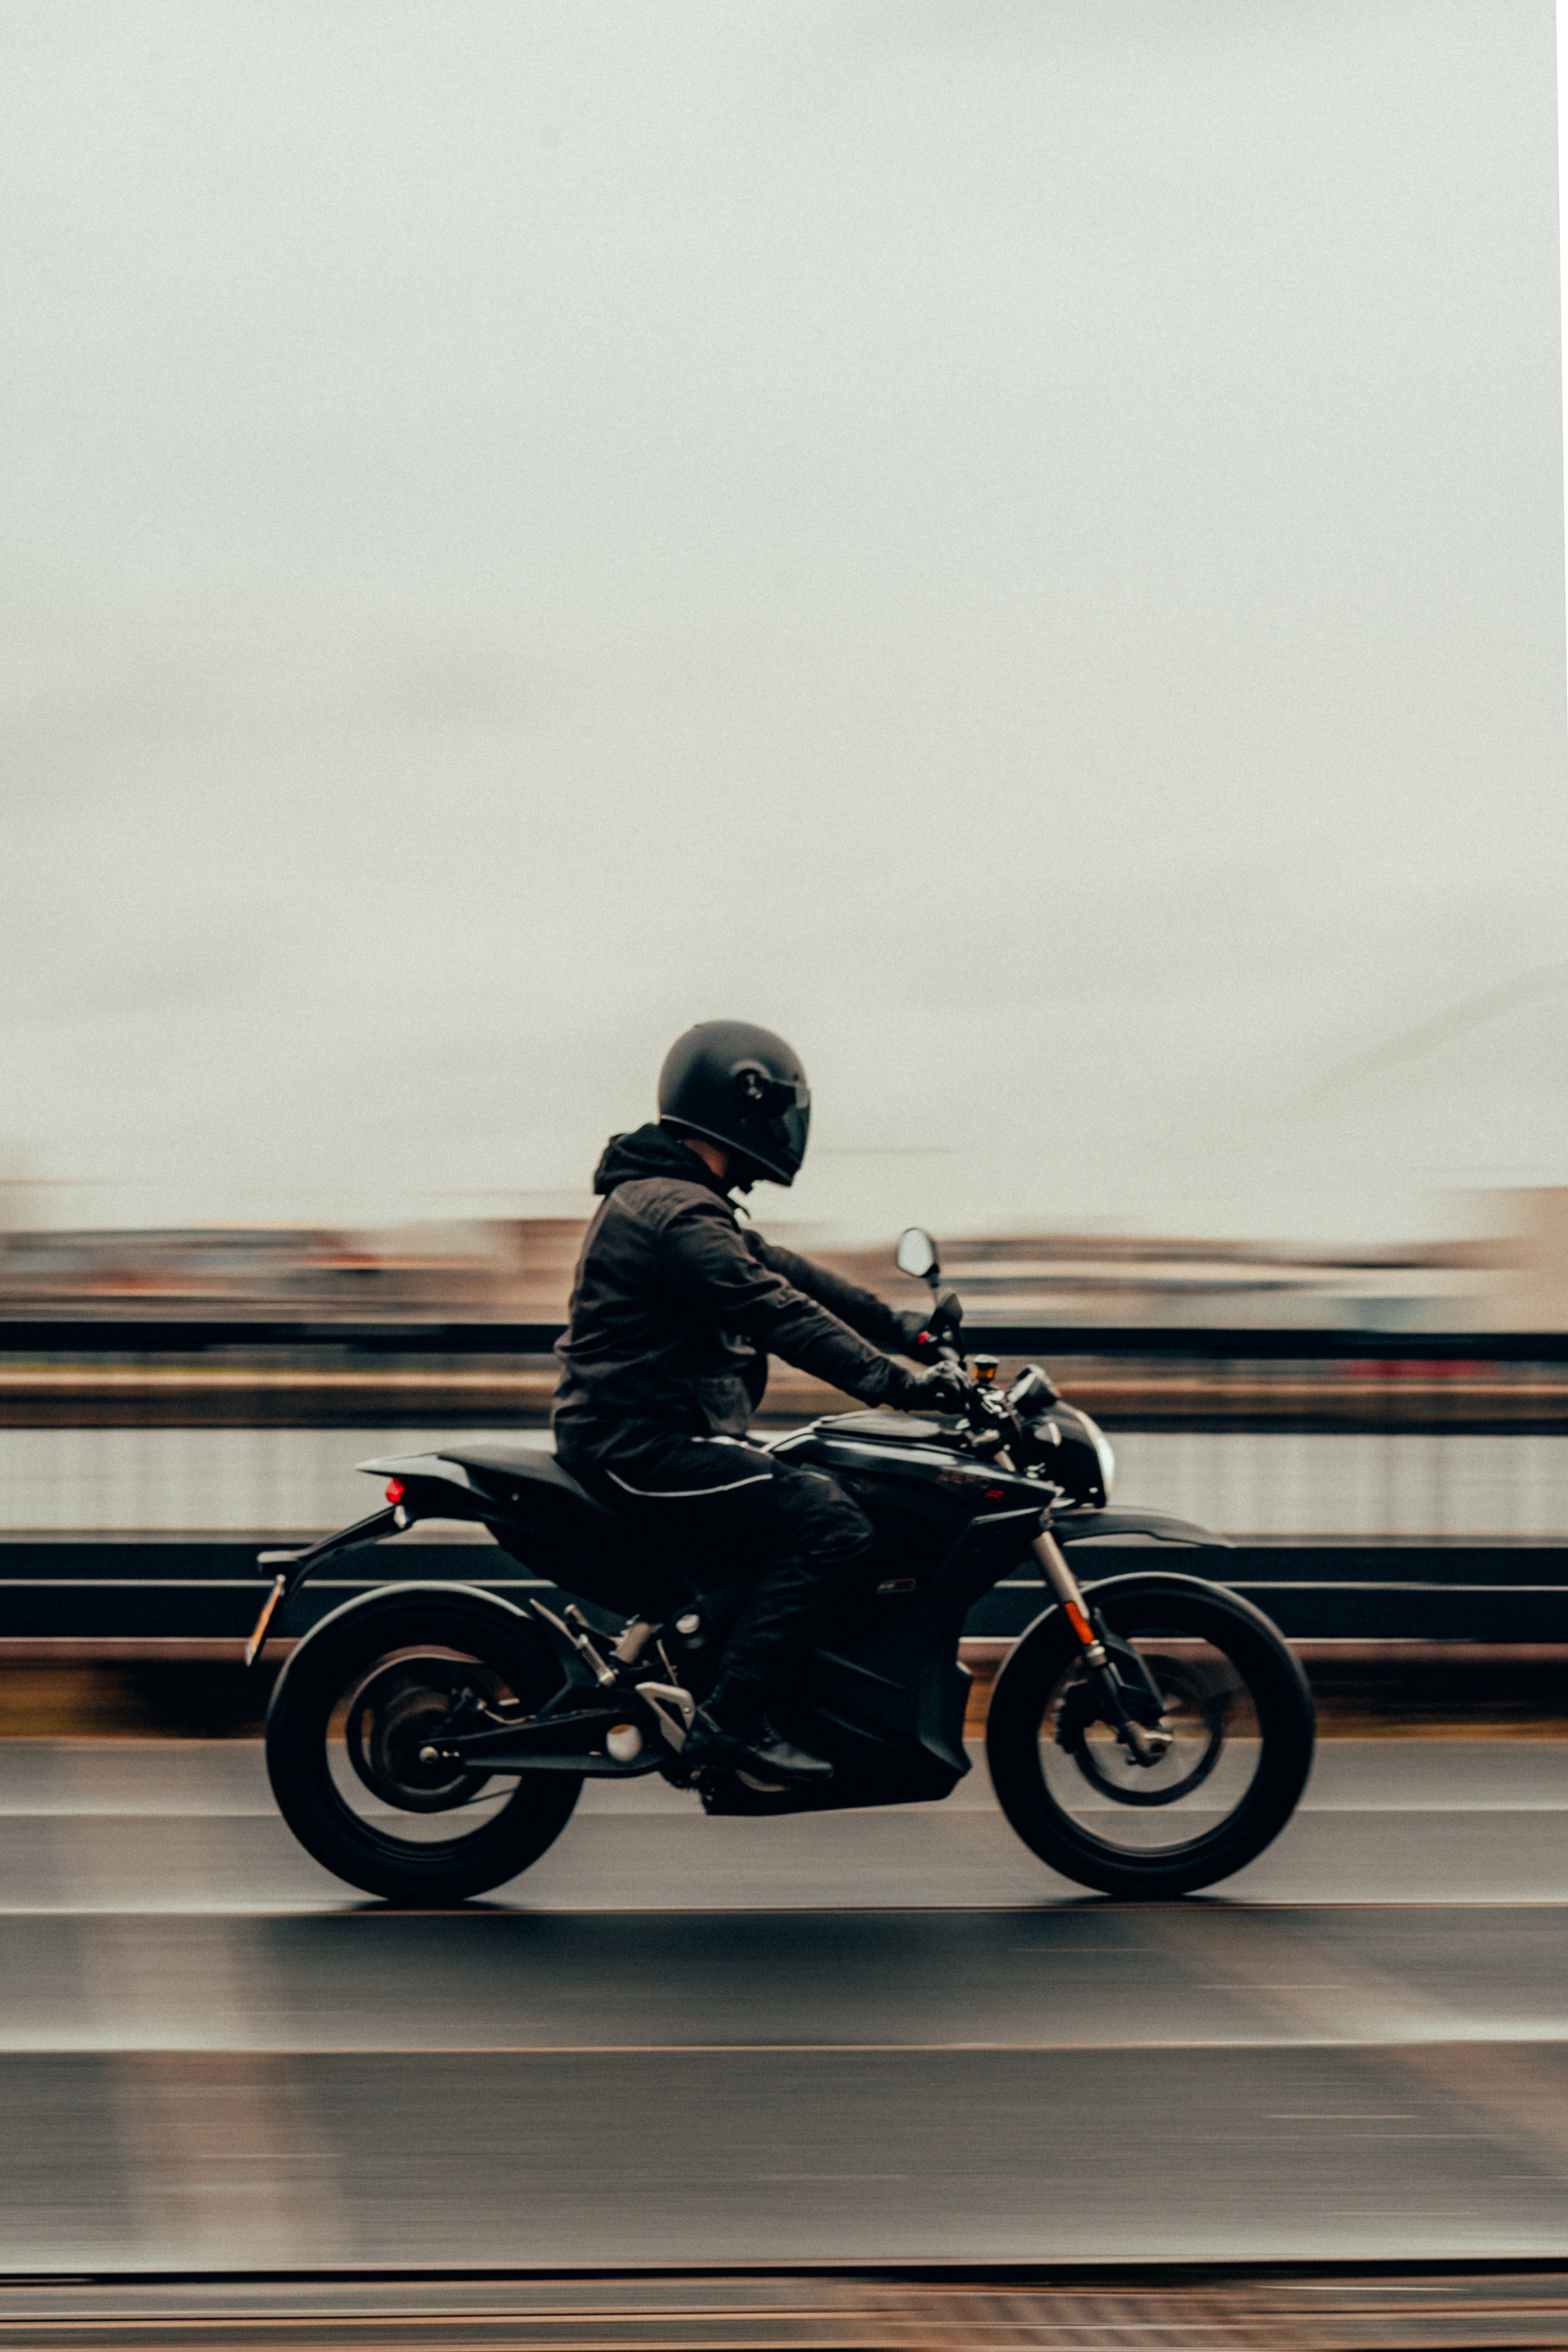 Mobile wallpaper speed, motorcycles, traffic, movement, motorcyclist, motorcycle, race